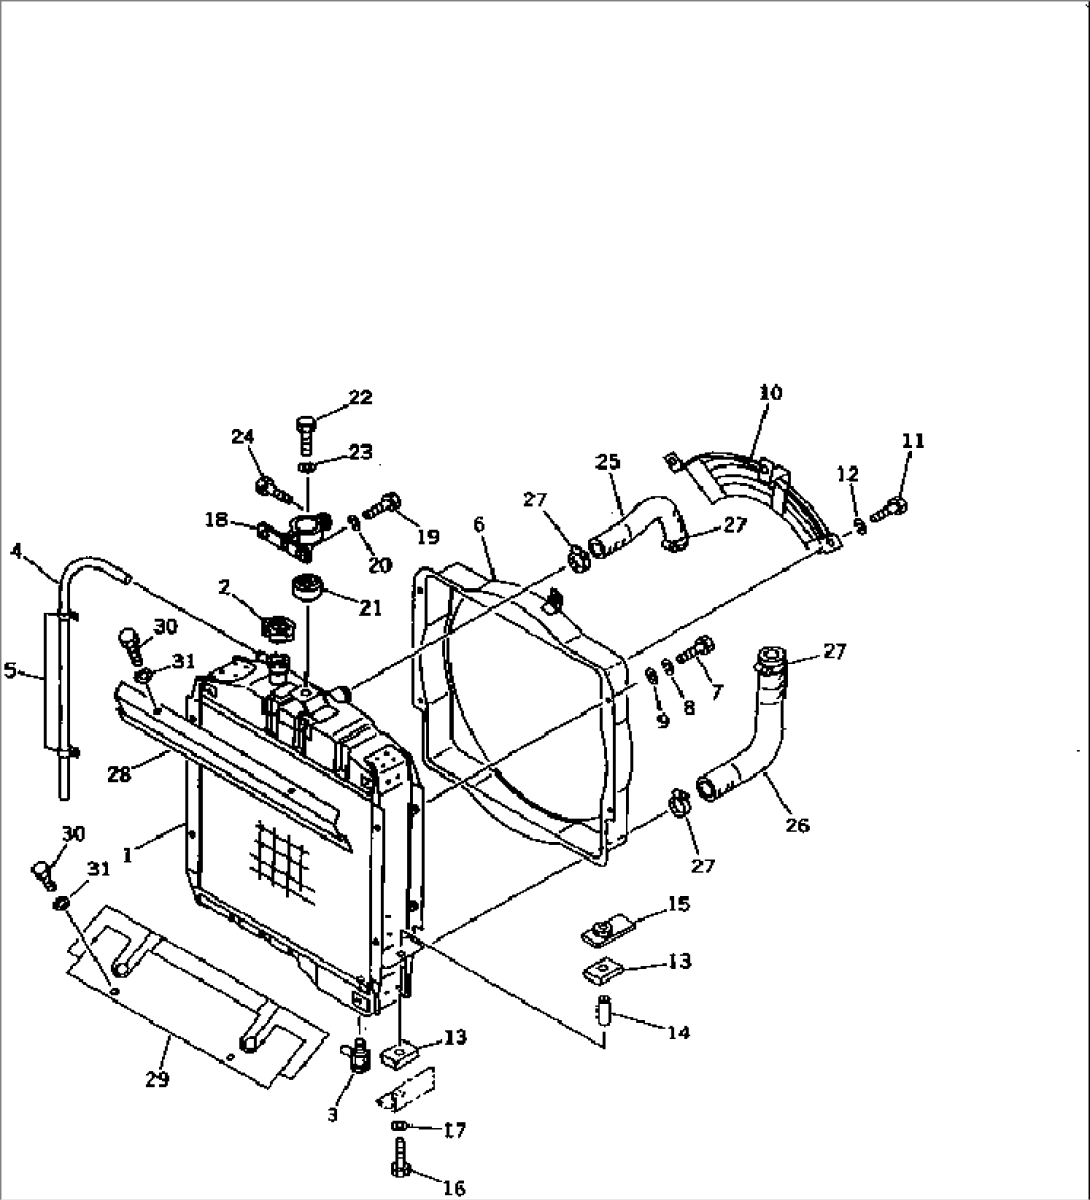 RADIATOR AND PIPING (FOR LARGE CAPACITY RADIATOR)